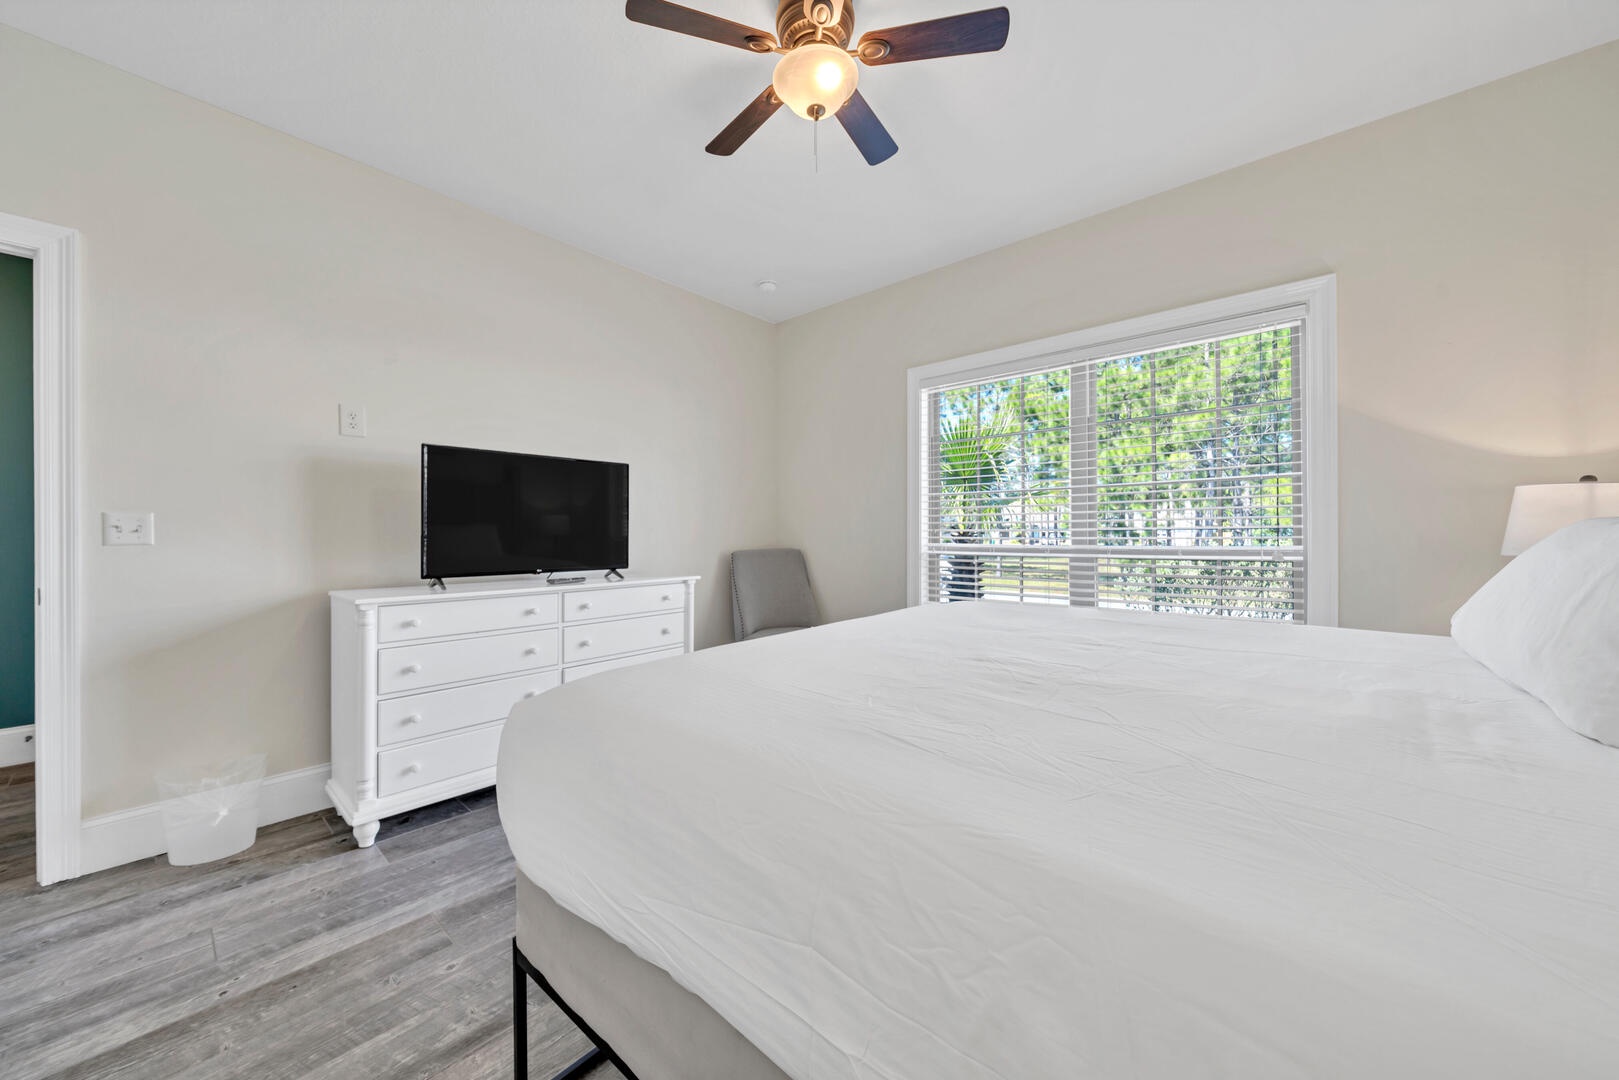 The guest bedroom features a king size bed and plentiful light!